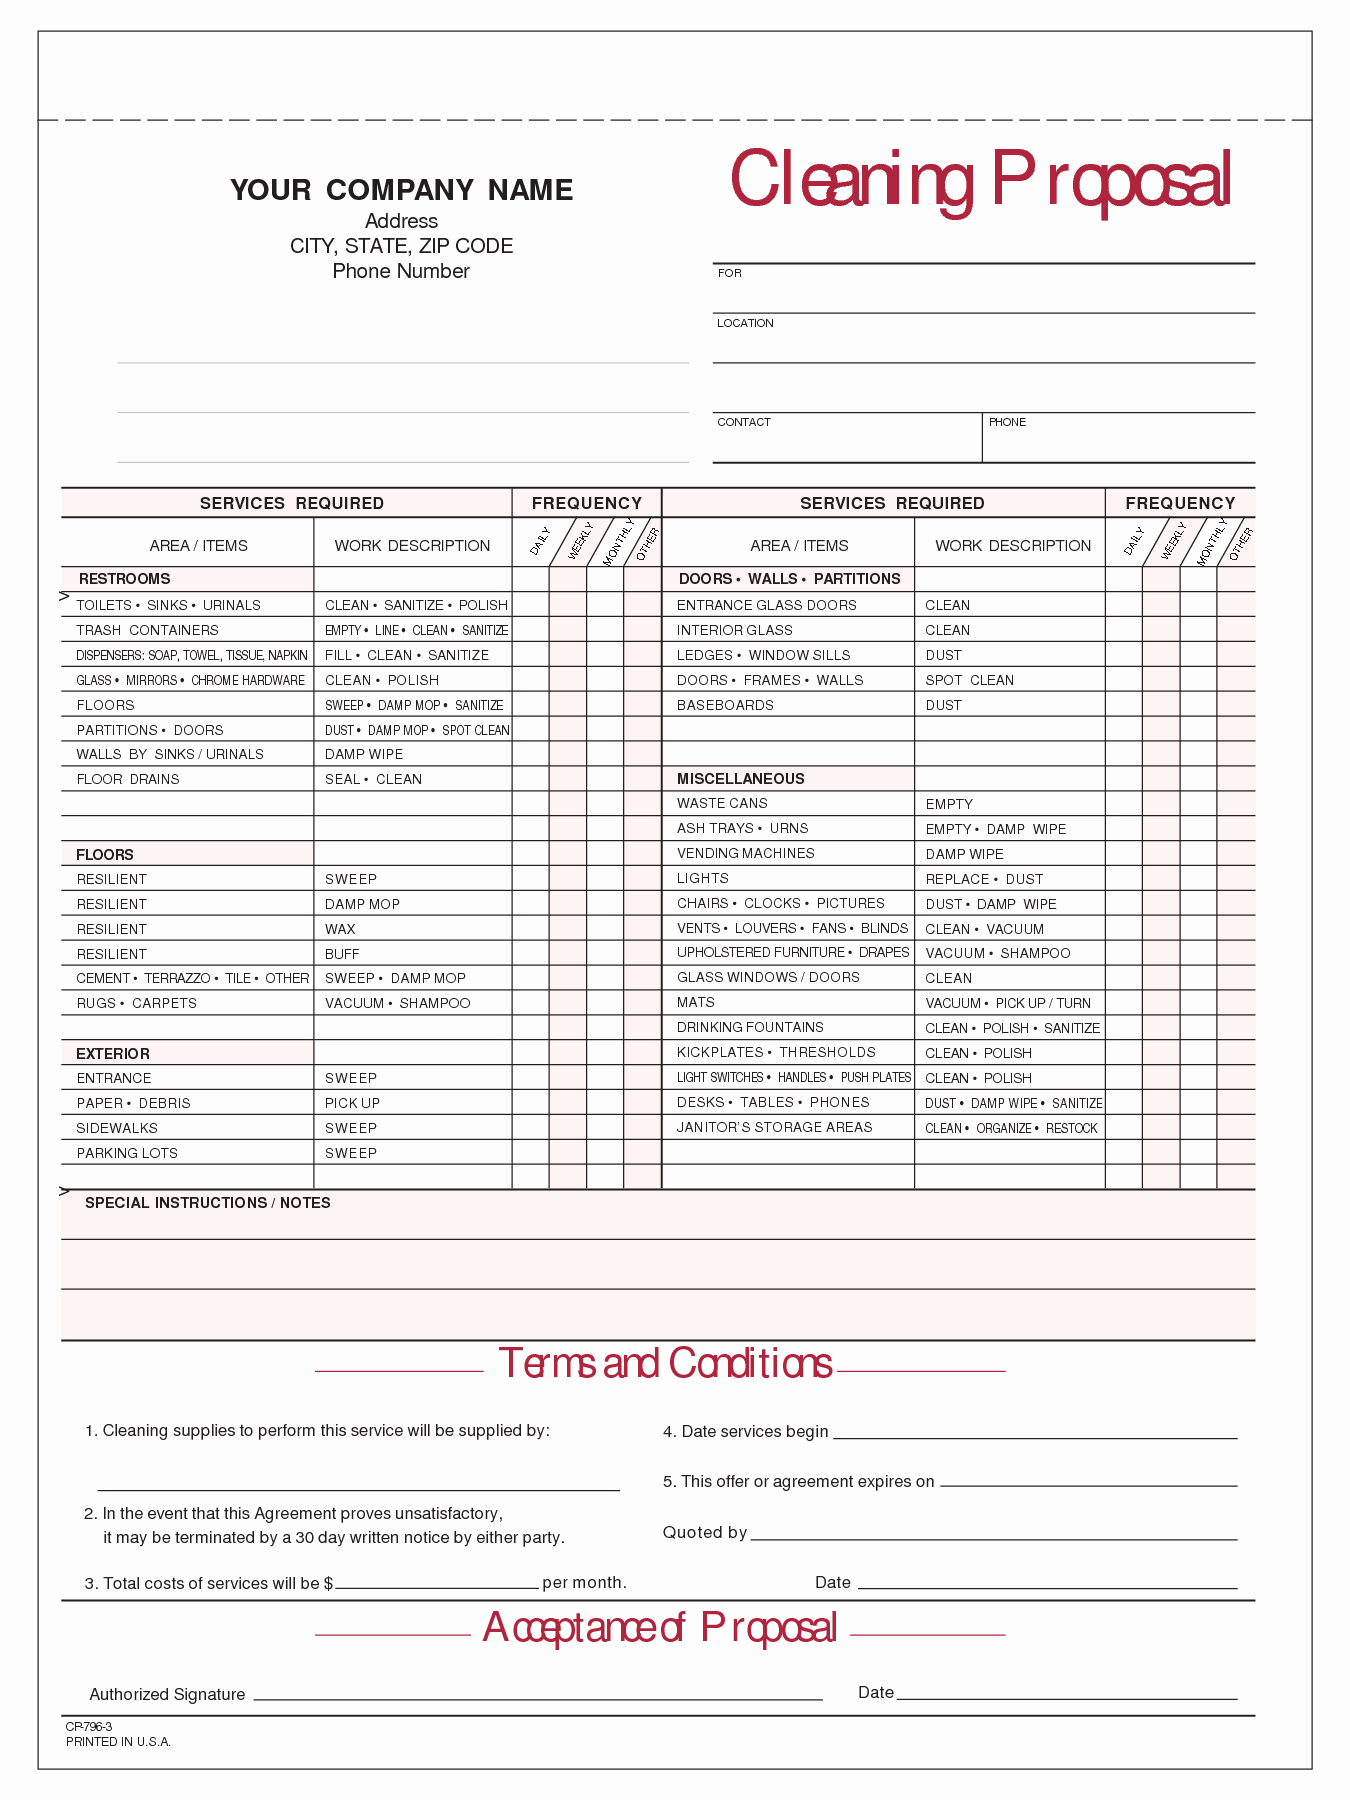 Cleaning Services Price List Template Awesome Janitorial Cleaning Proposal Templates